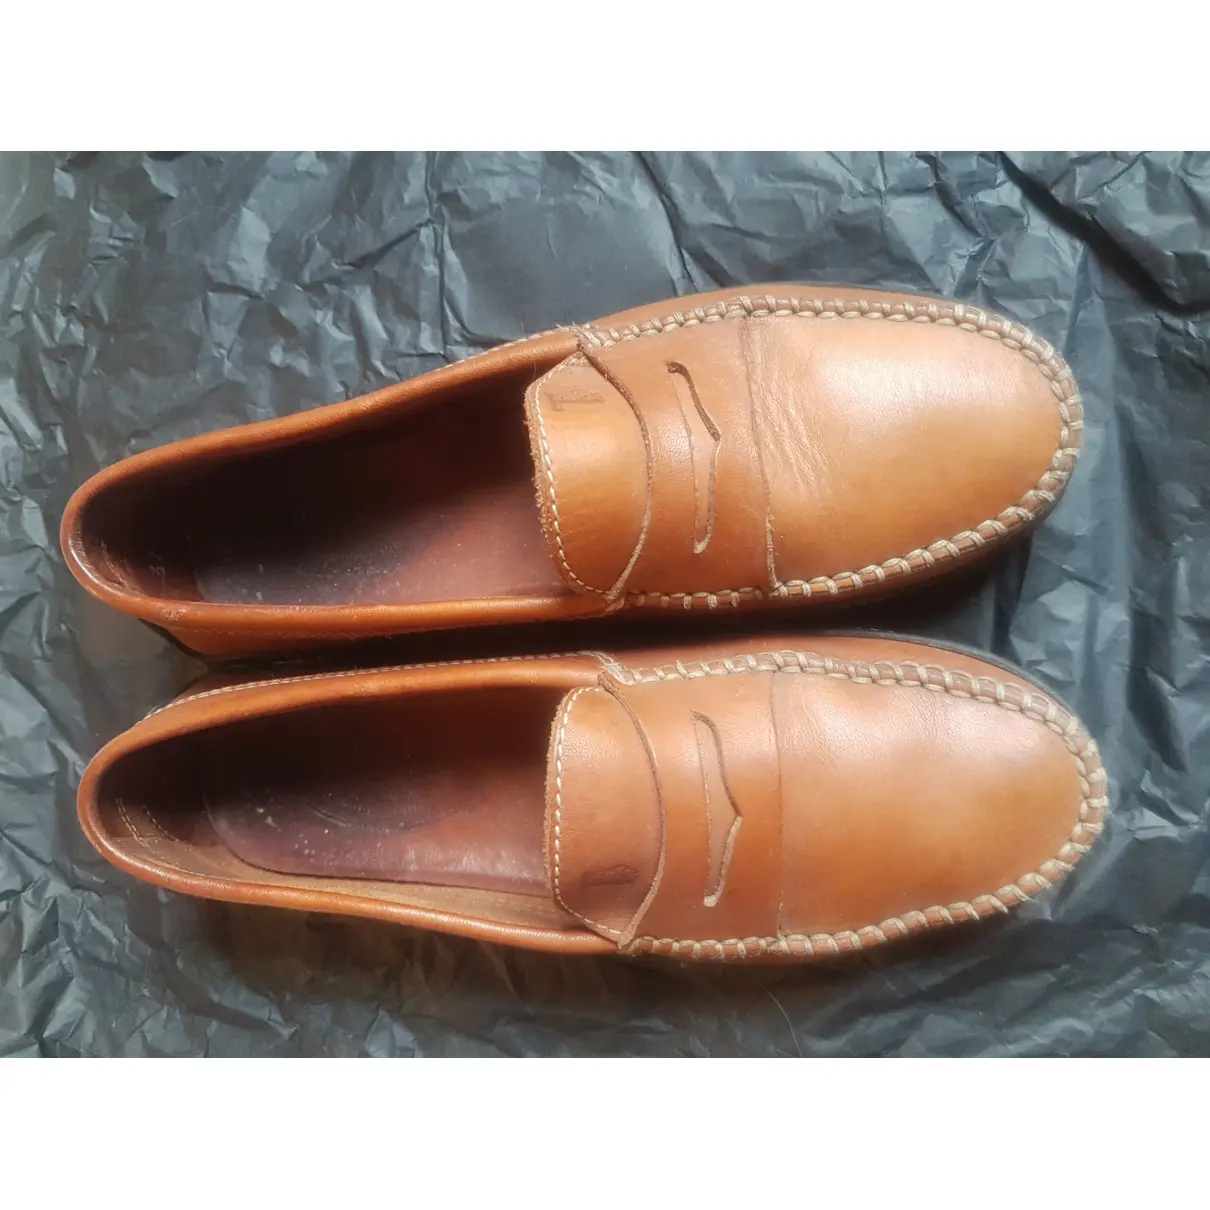 Buy Tod's Leather flats online - Vintage